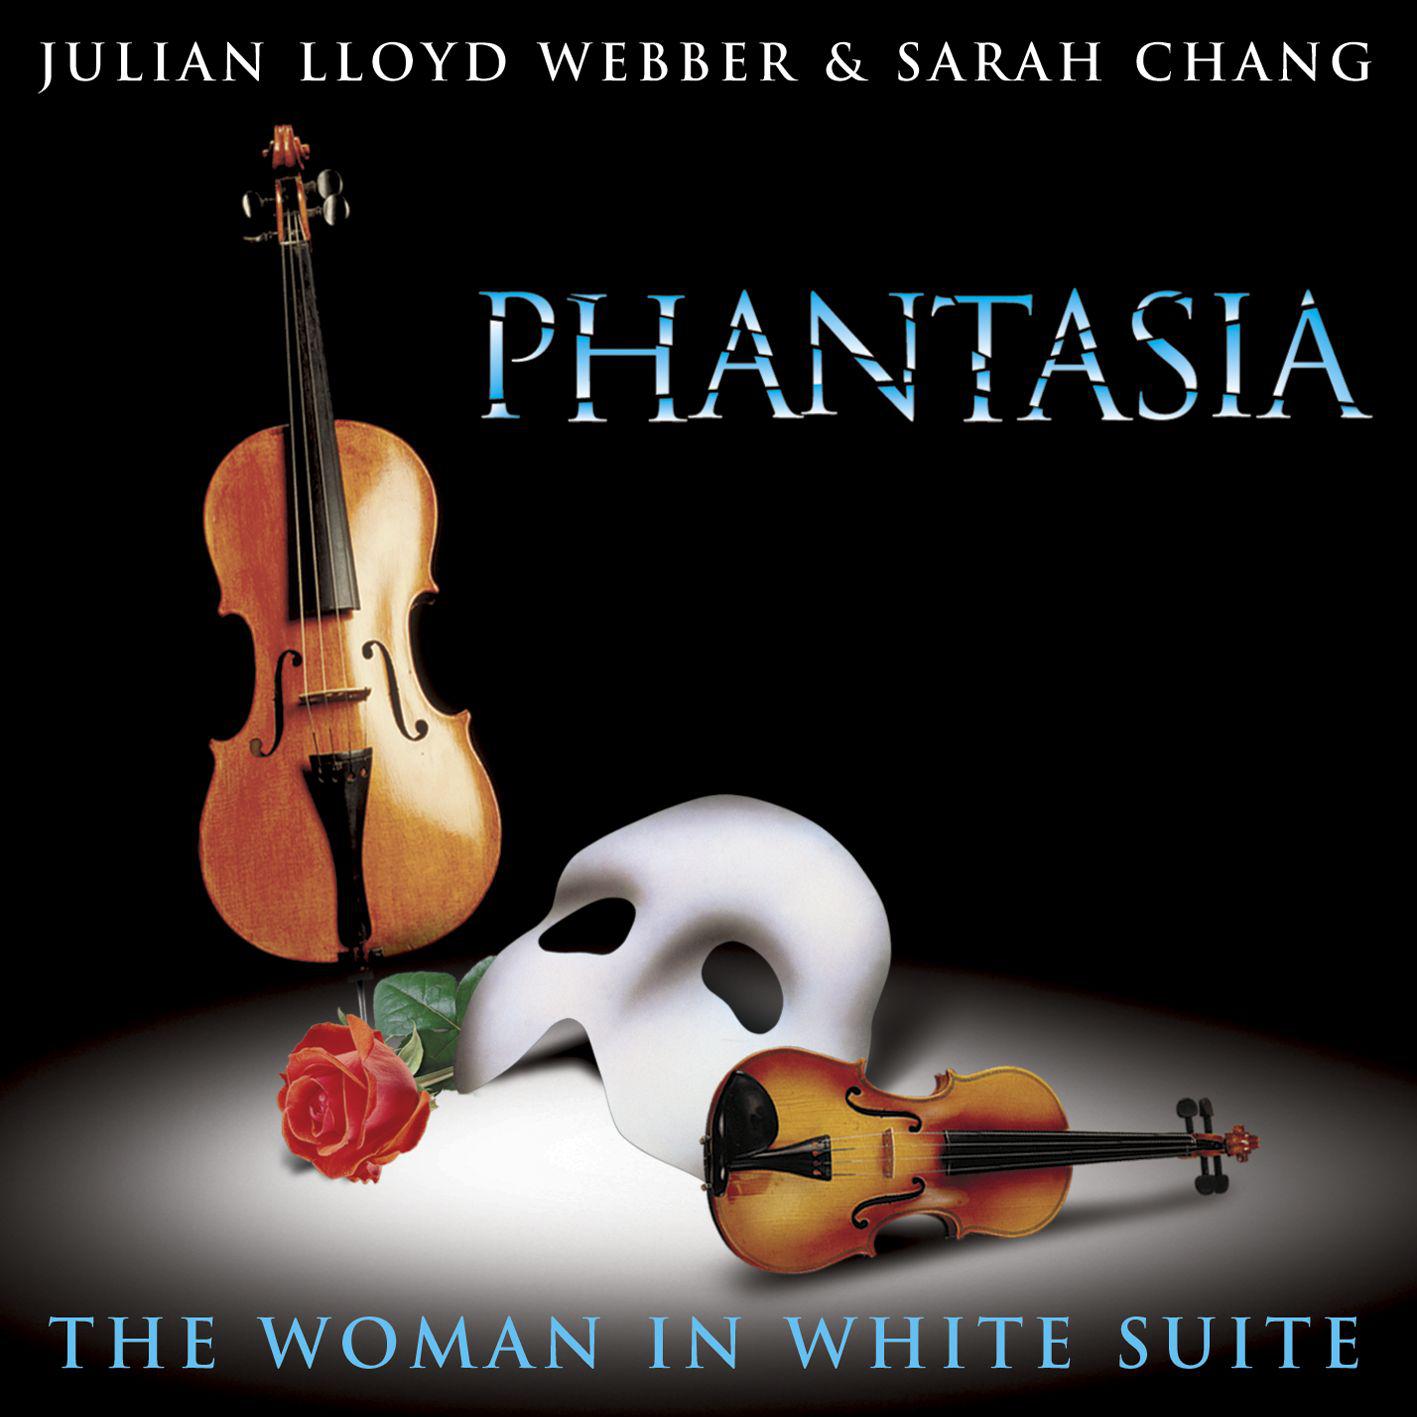 The Woman in White Suite